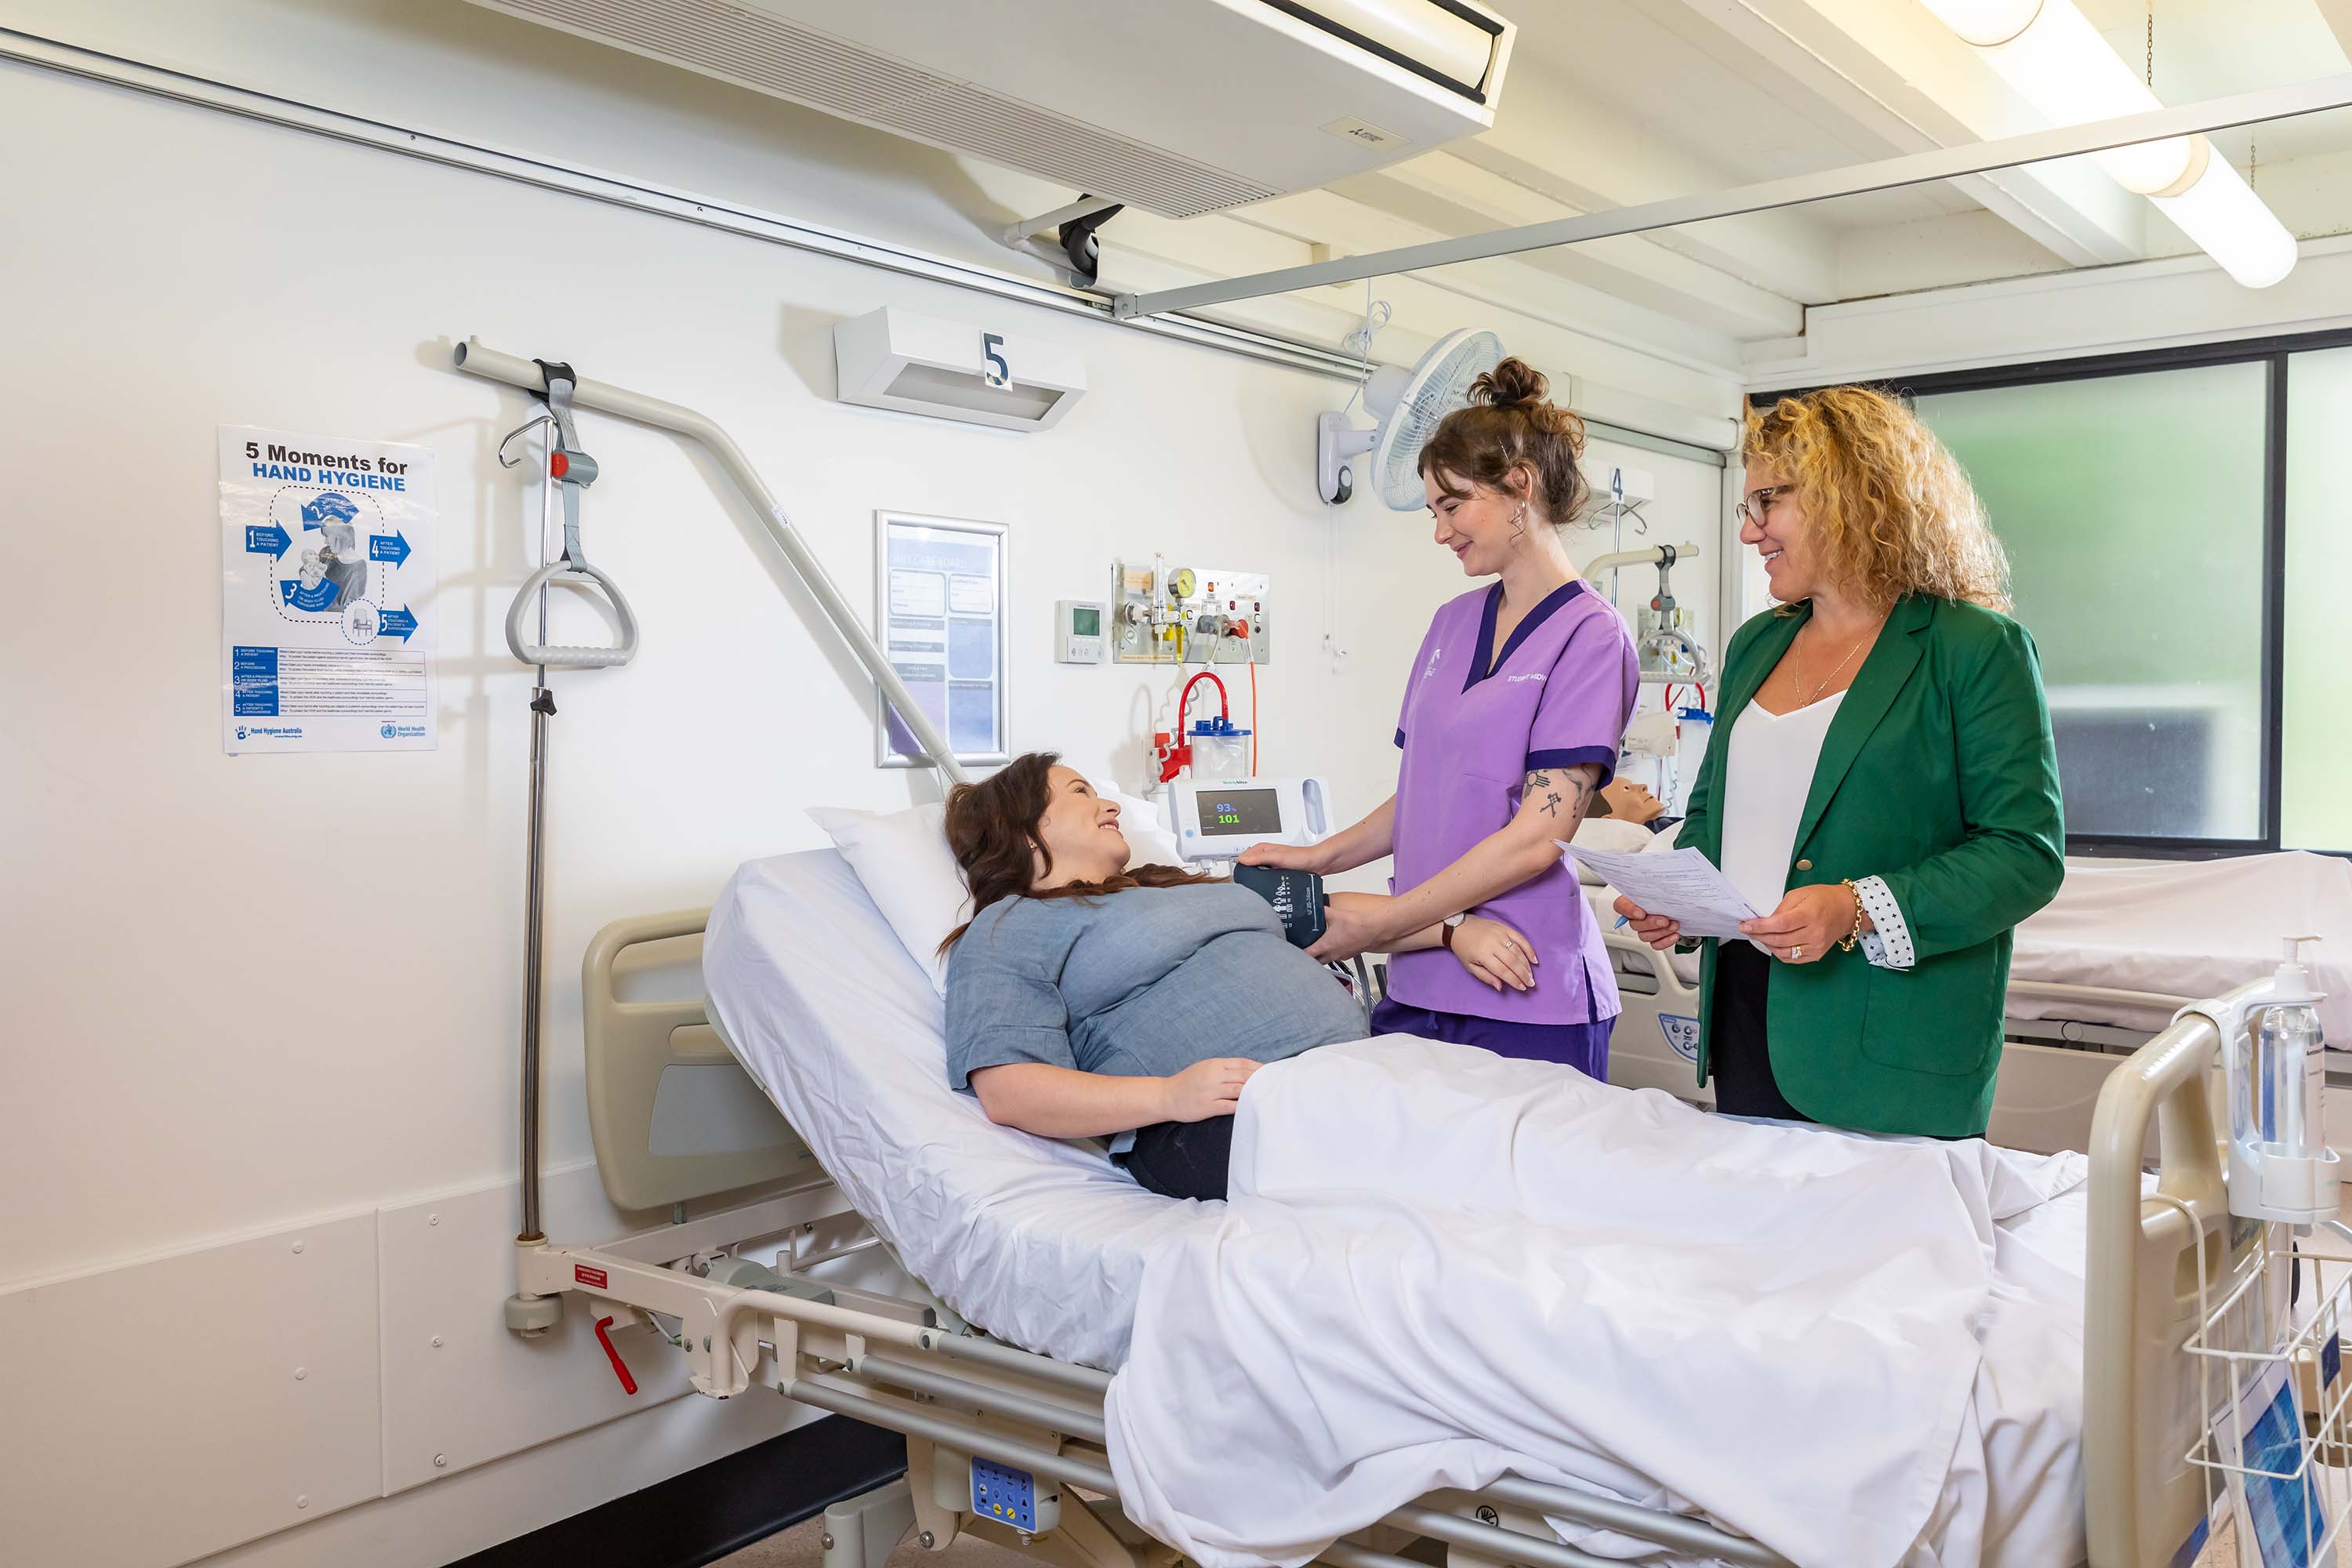 student, Nicole, pictured in a hospital setting assisting a patient in a bed